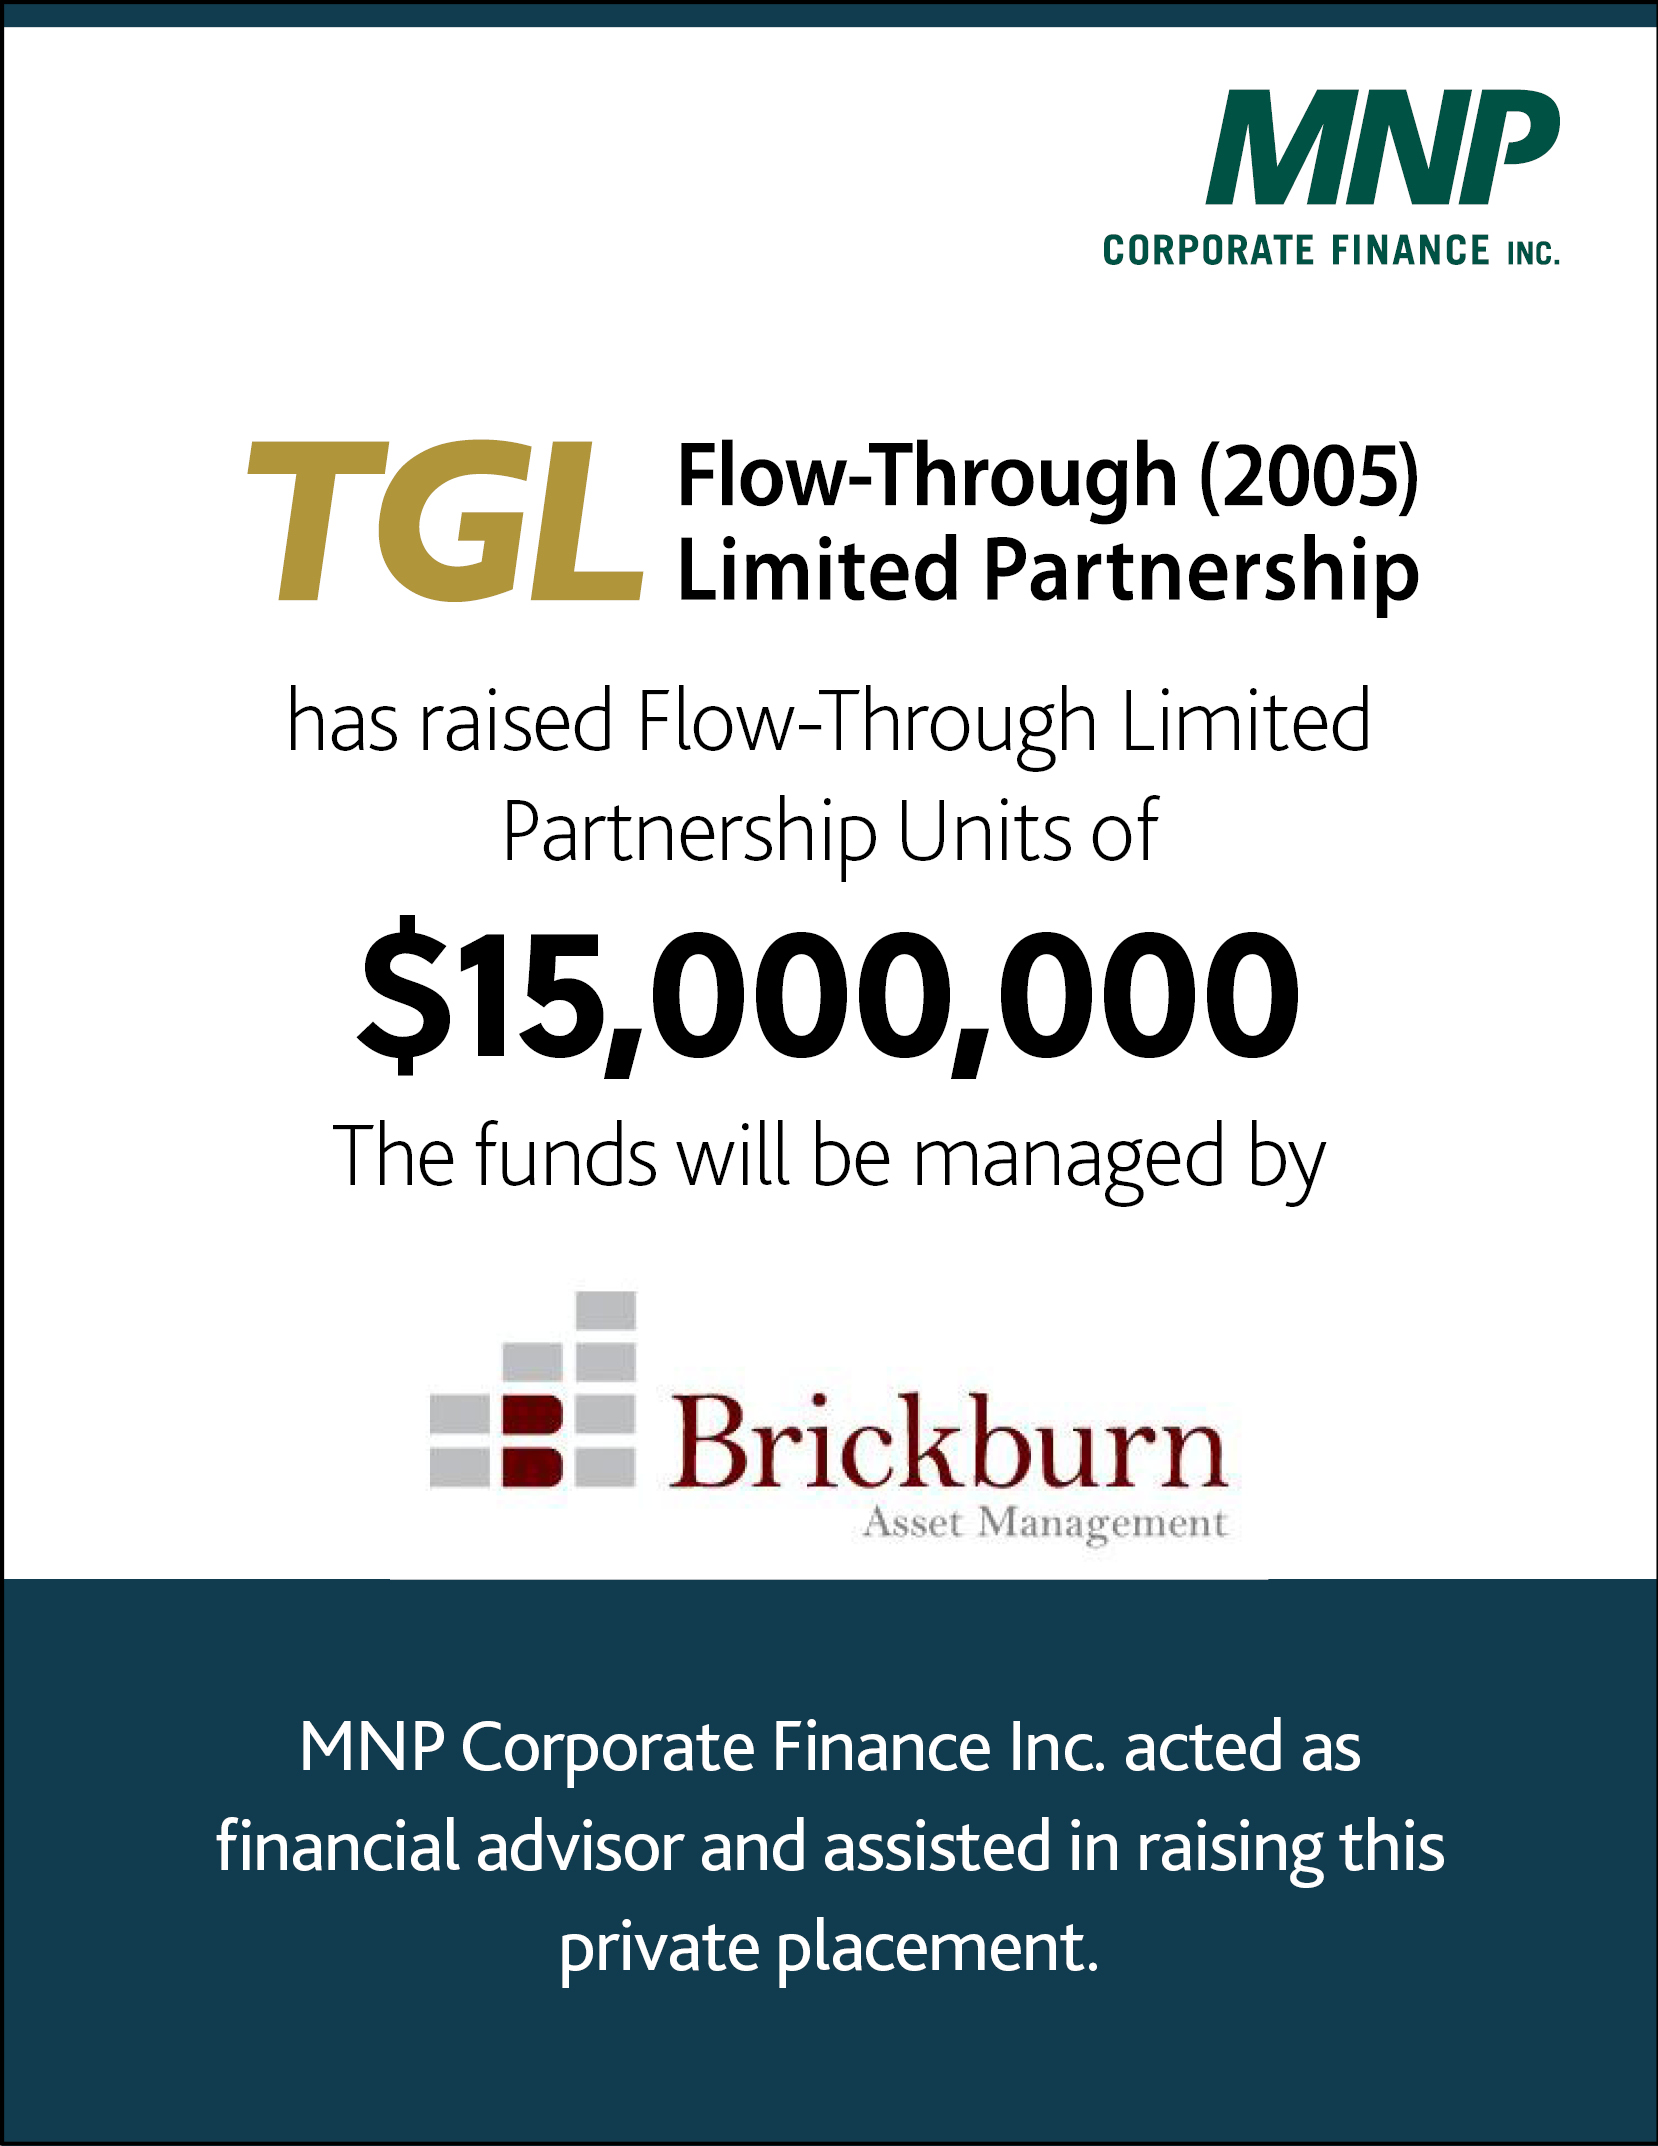 TGL Flow-Through (2005) Limited Partnership has raised Flow-Through Limited Partnership Units of $15,000,000 the funds will be managed by Brickburn Asset Management